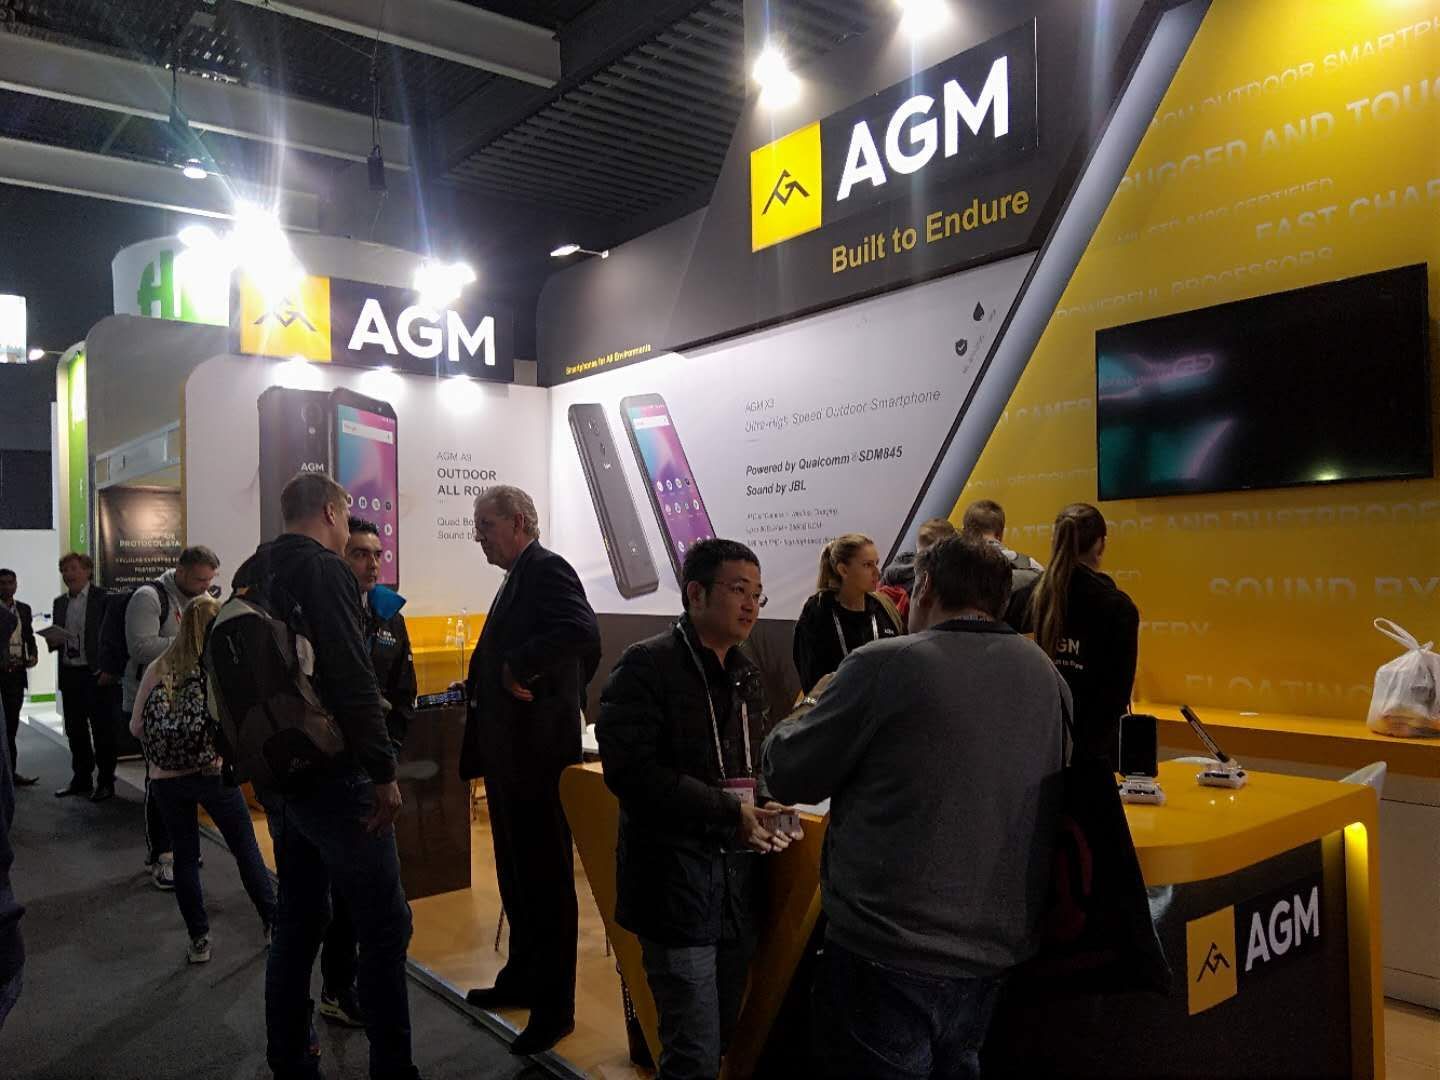 AGM booth at MWC - AGM is at MWC: super-durable phones coming to Europe, partnered with JBL for superior audio